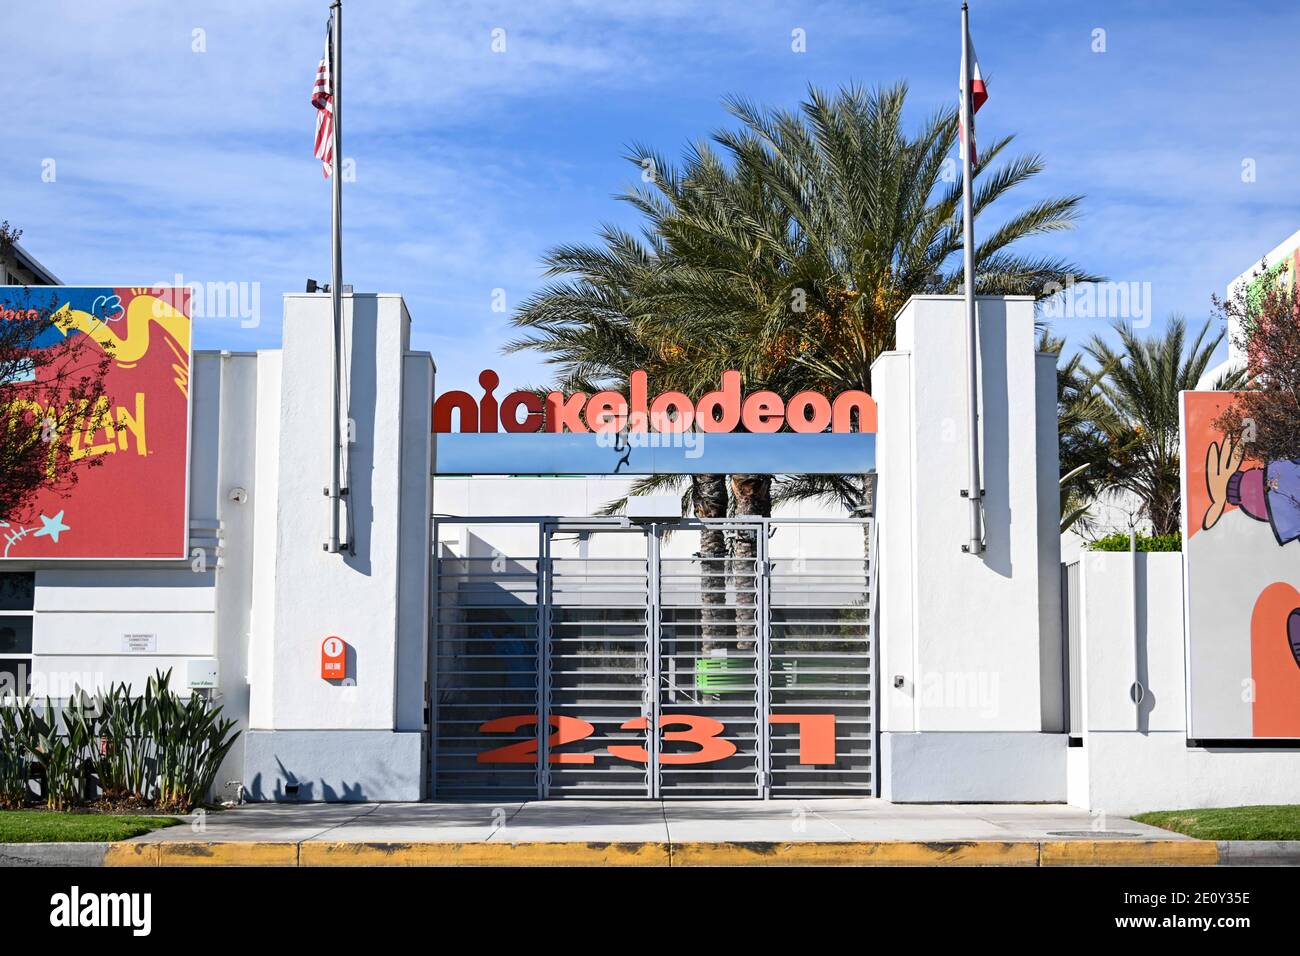 Burbank, United States. 30th Dec, 2020. General overall view of Nickelodeon  Animation Studio, Wednesday, Dec. 30,